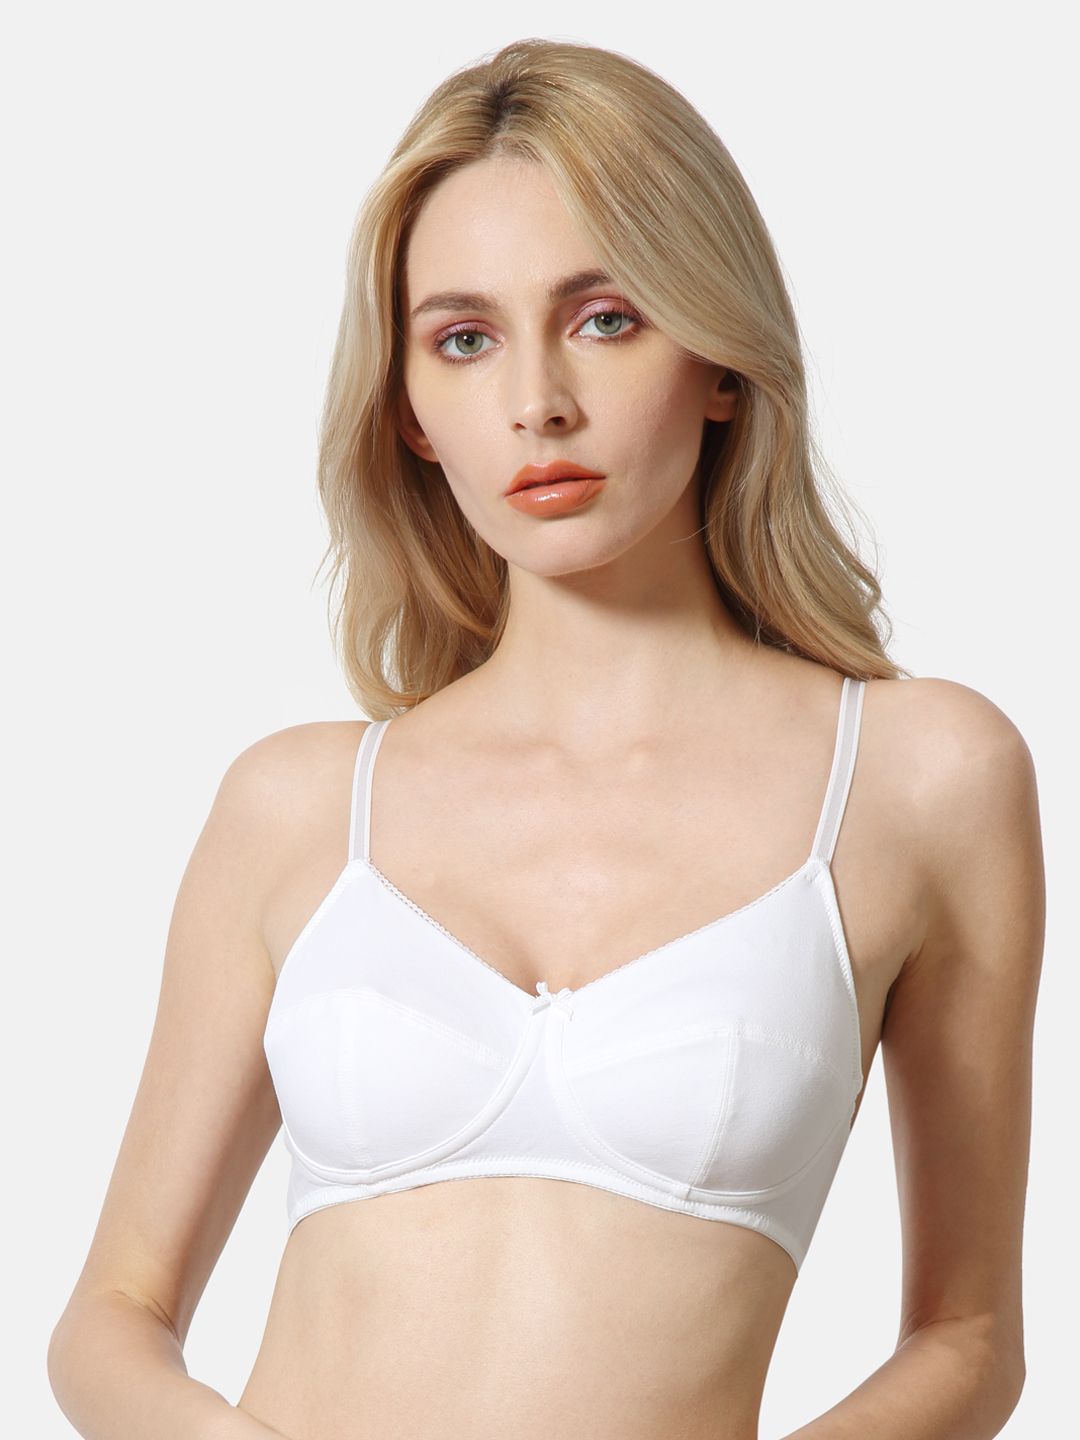 Van Heusen Cotton Slim Fit Antibacterial Bra - Non-Padded Non-Wired ILIBR1ACSSWH11005 Price in India